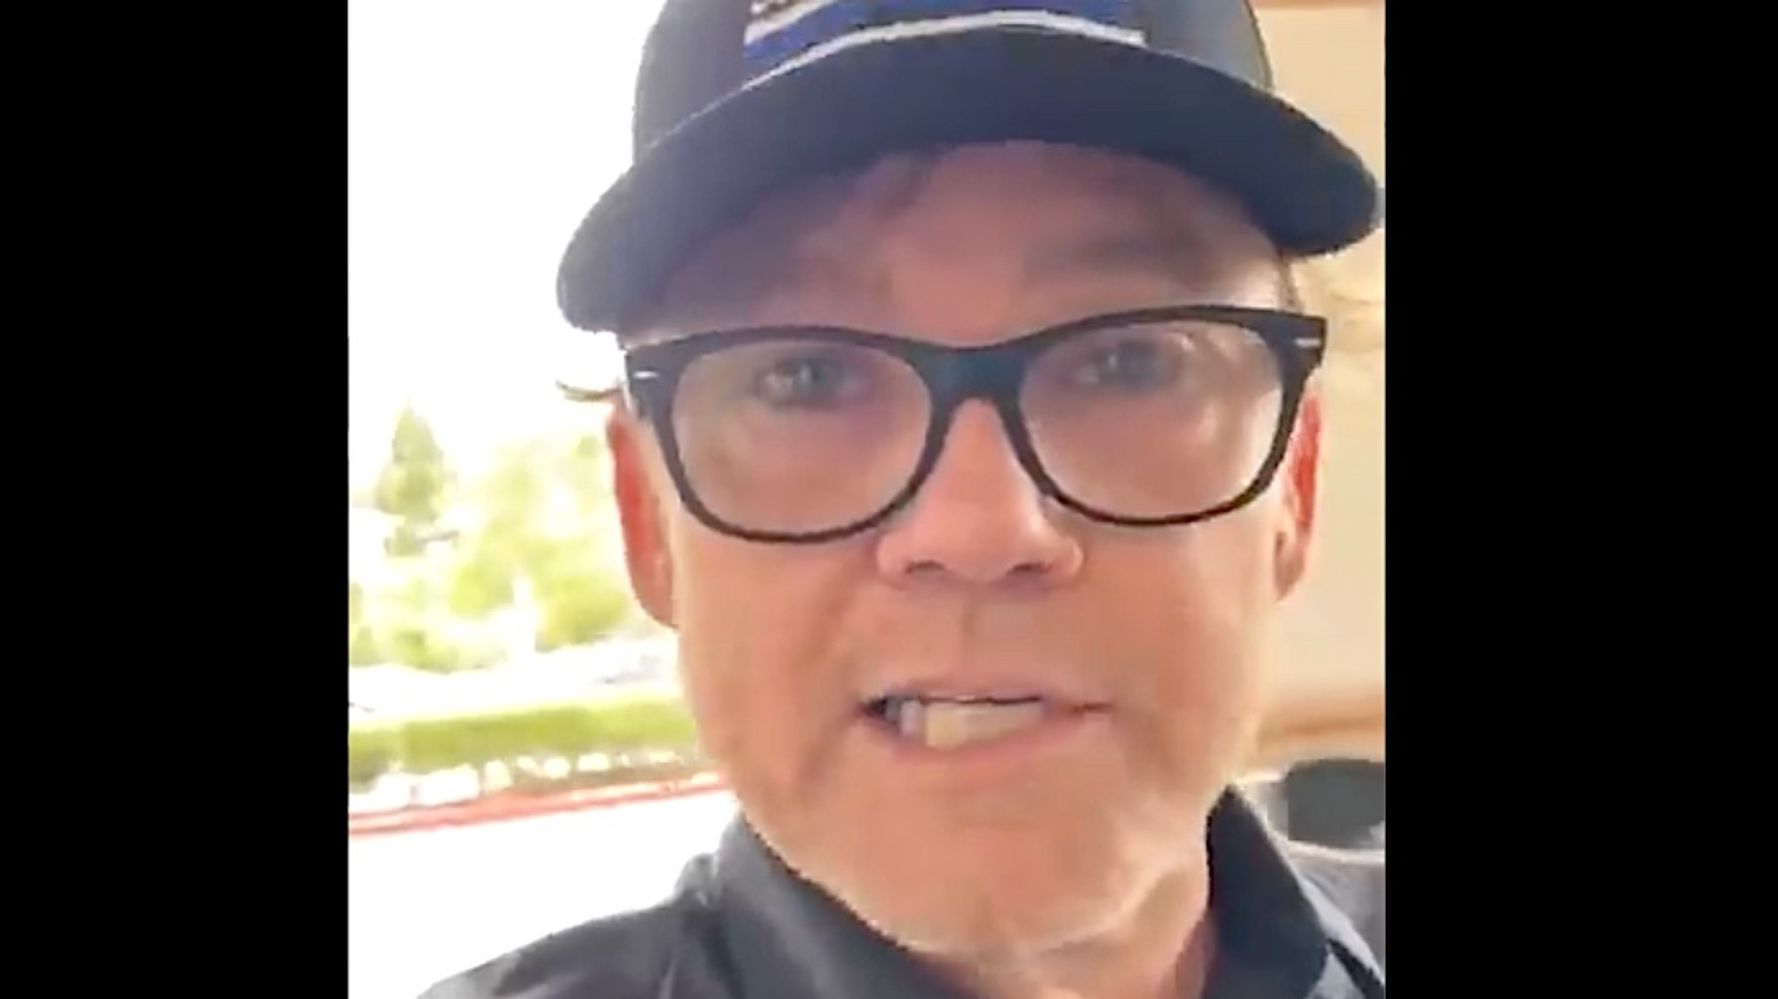 Former Child Star Ricky Schroder Roasted On Twitter For Harassing Costco Workers